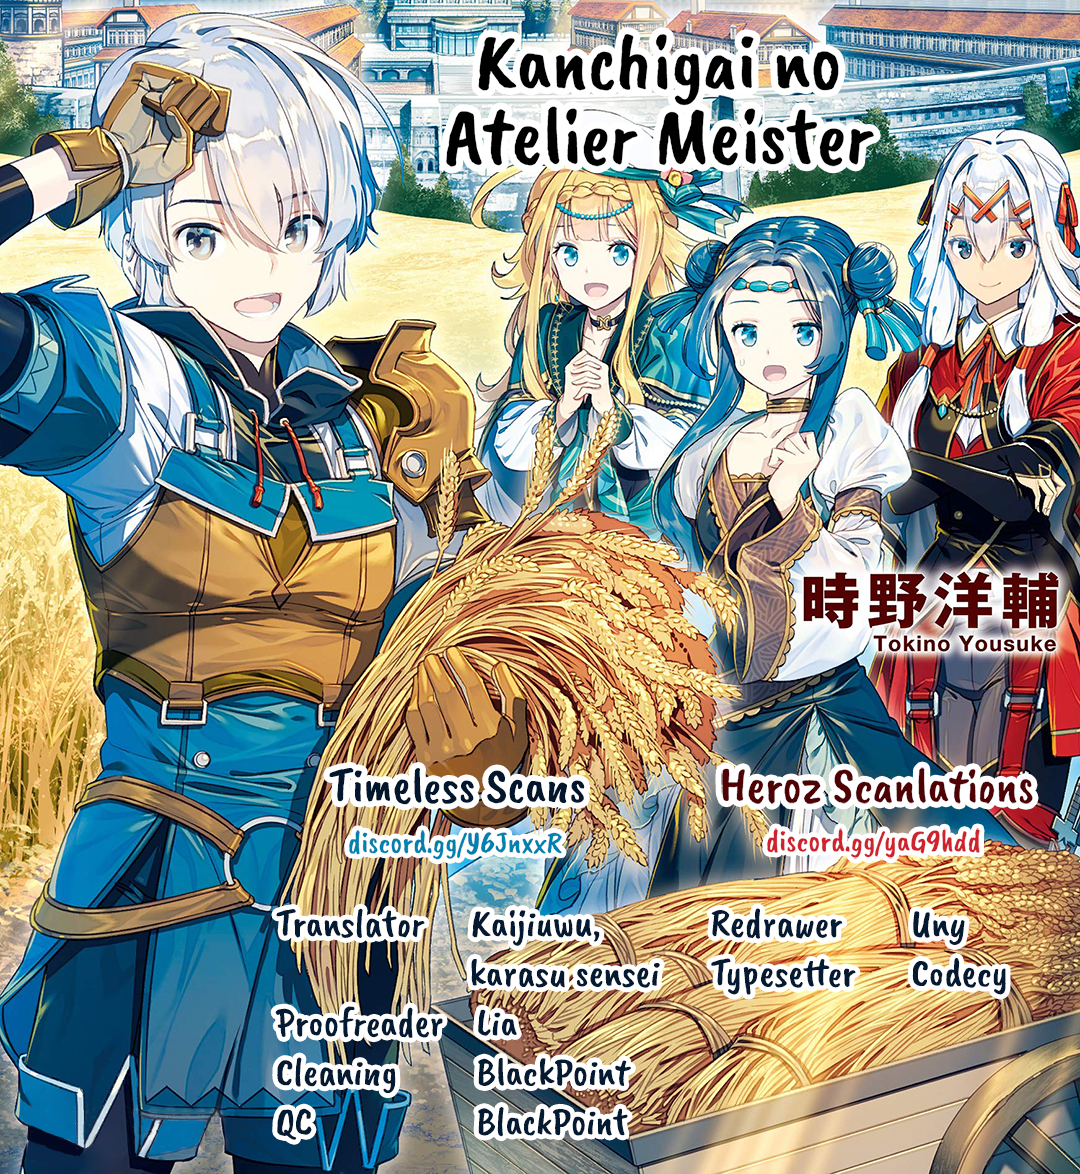 Kanchigai no Atelier Master - Chapter 7467 - A peculiar rice gruel - Image 1